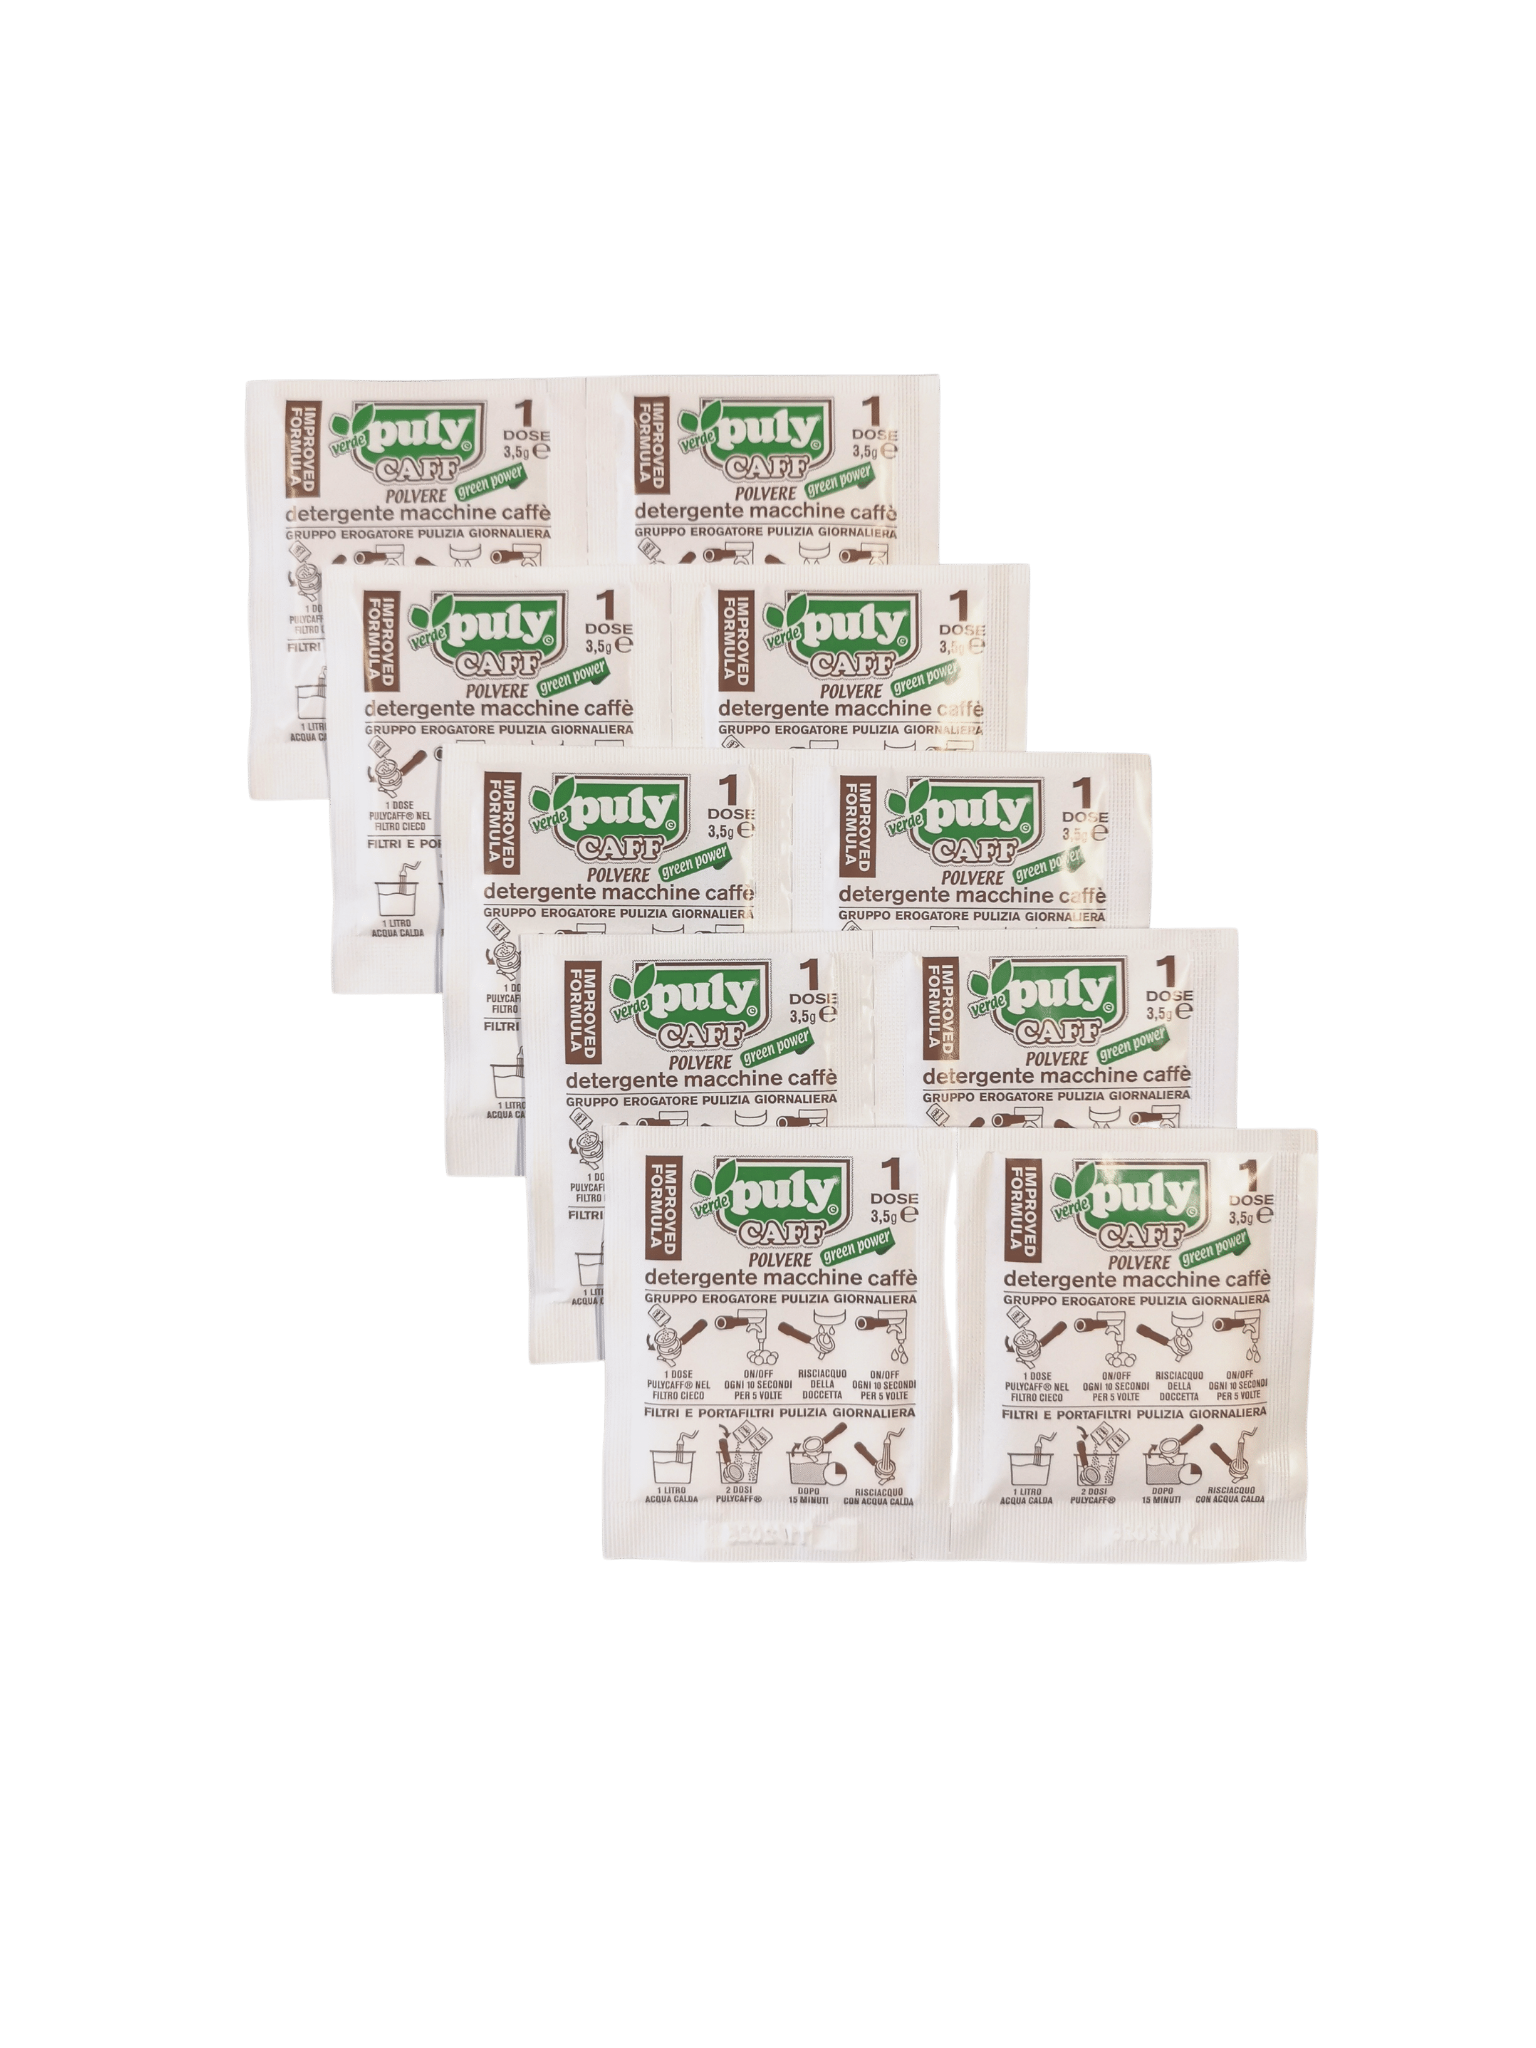 Puly - Caff Green Cleaner Sachets 10 doses x 3.5g Wholesaler and Supplier in Kuwait (Cleaner for Filter Holder, Filter Baskets, Shower Screen, Group Heads)